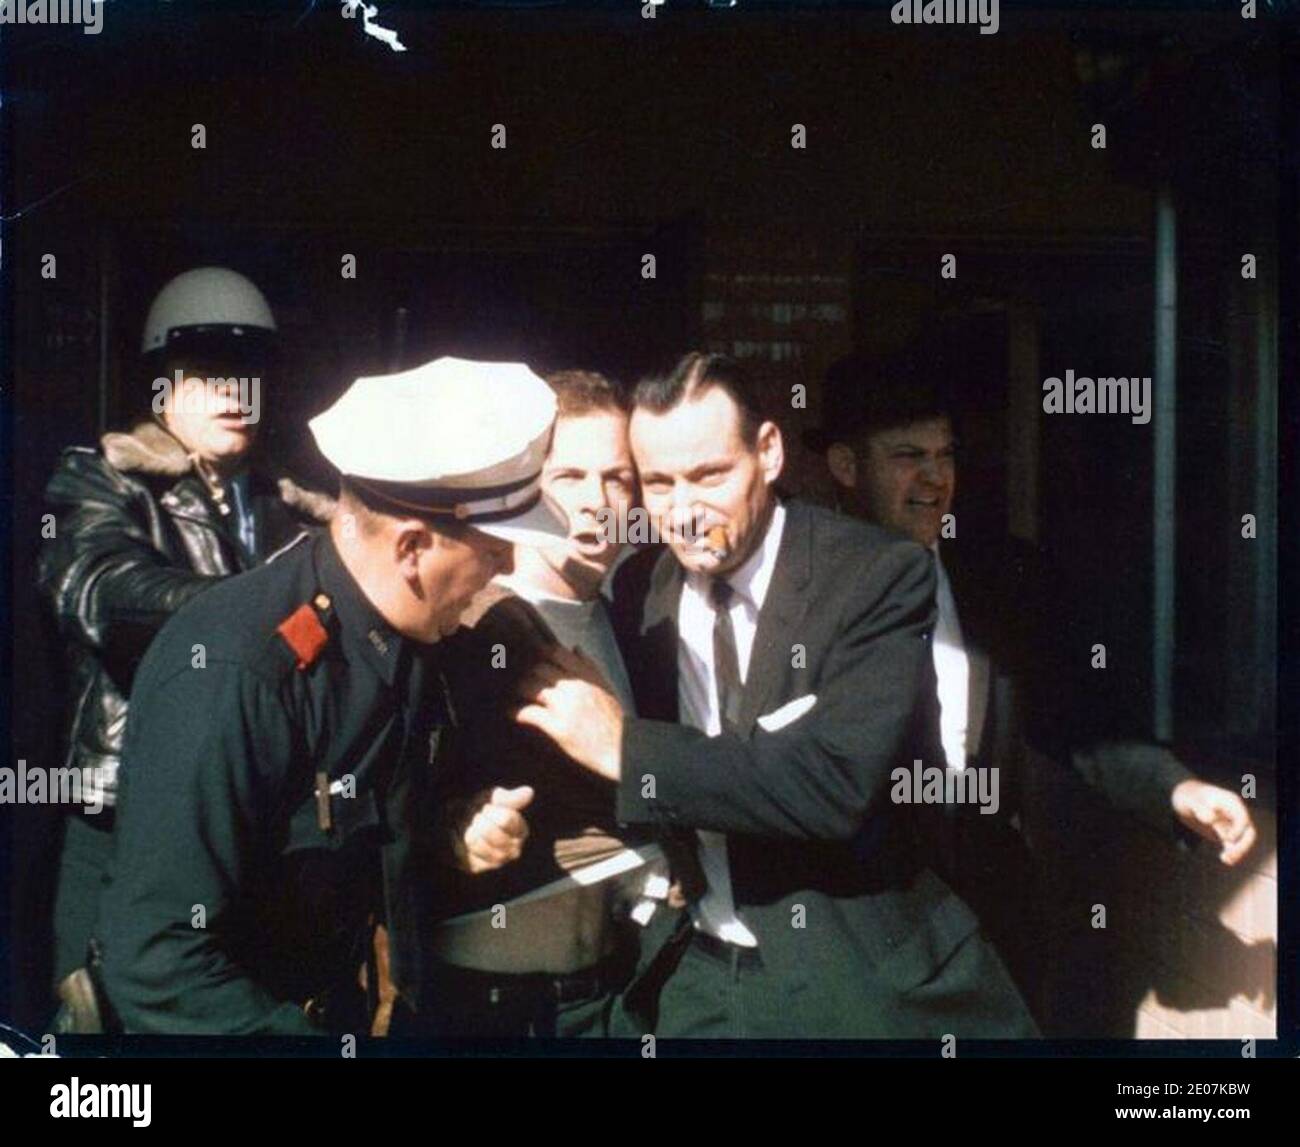 Lee Harvey Oswald arrested at the Texas Theatre, Dallas, Texas, 22 November 1963. Stock Photo